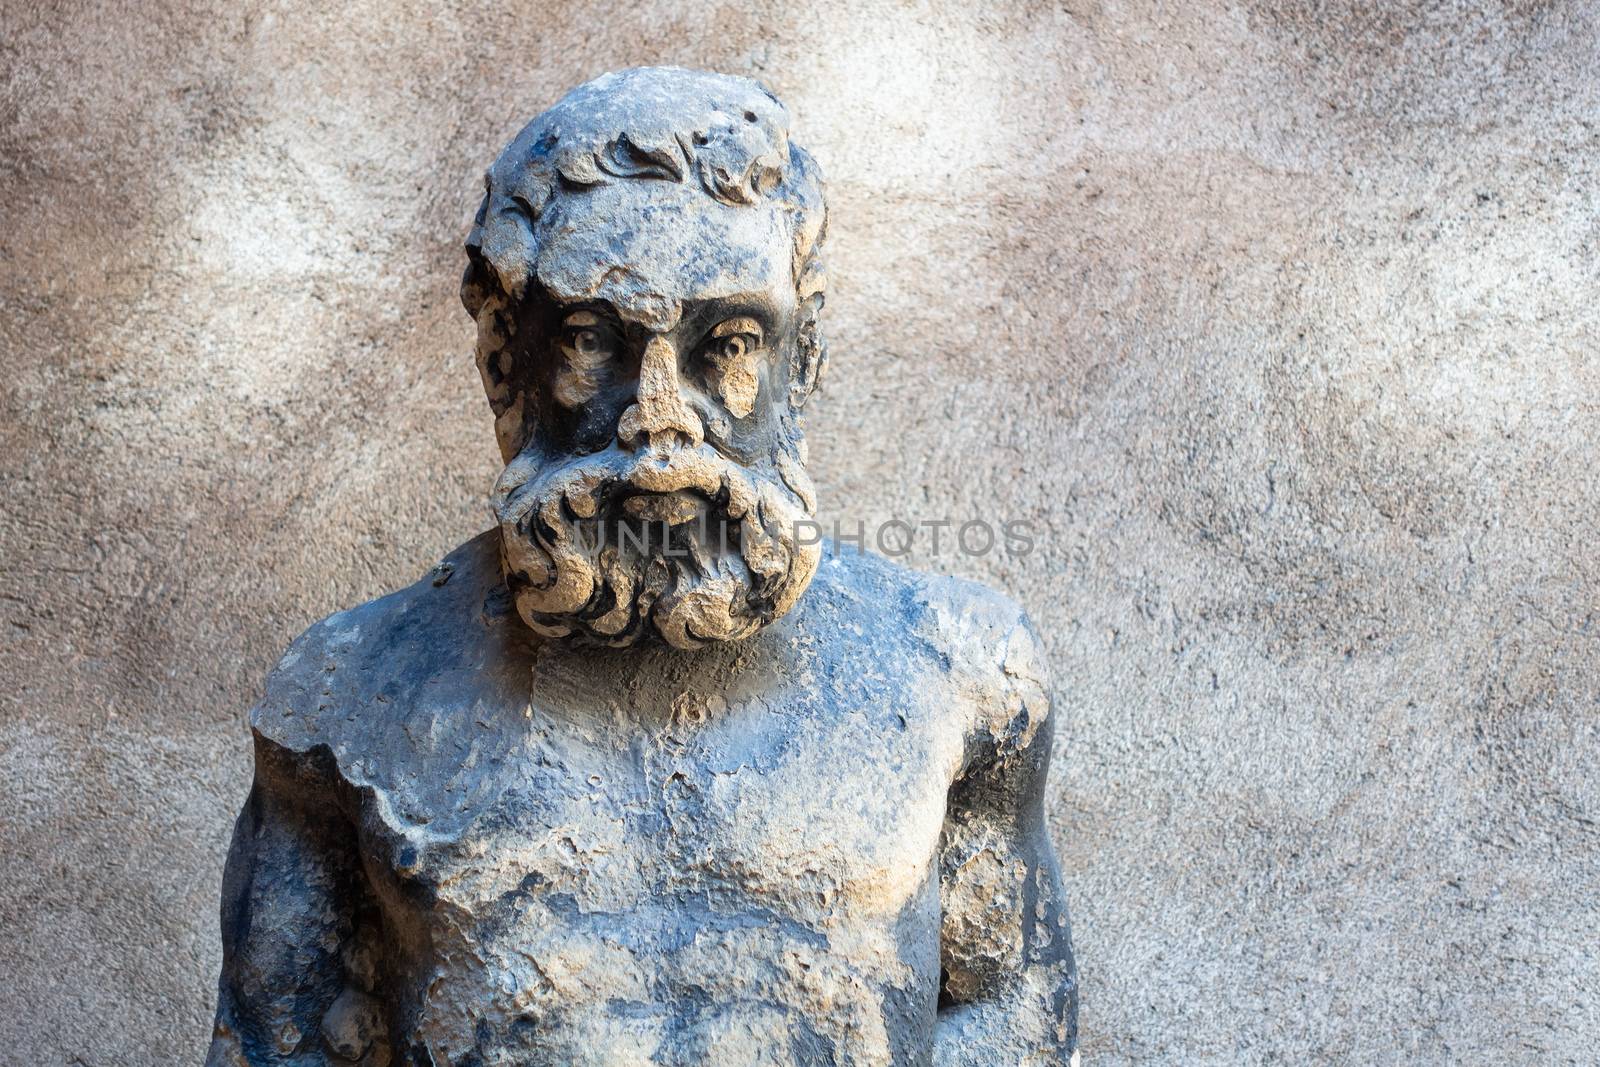 An image of an old male statue